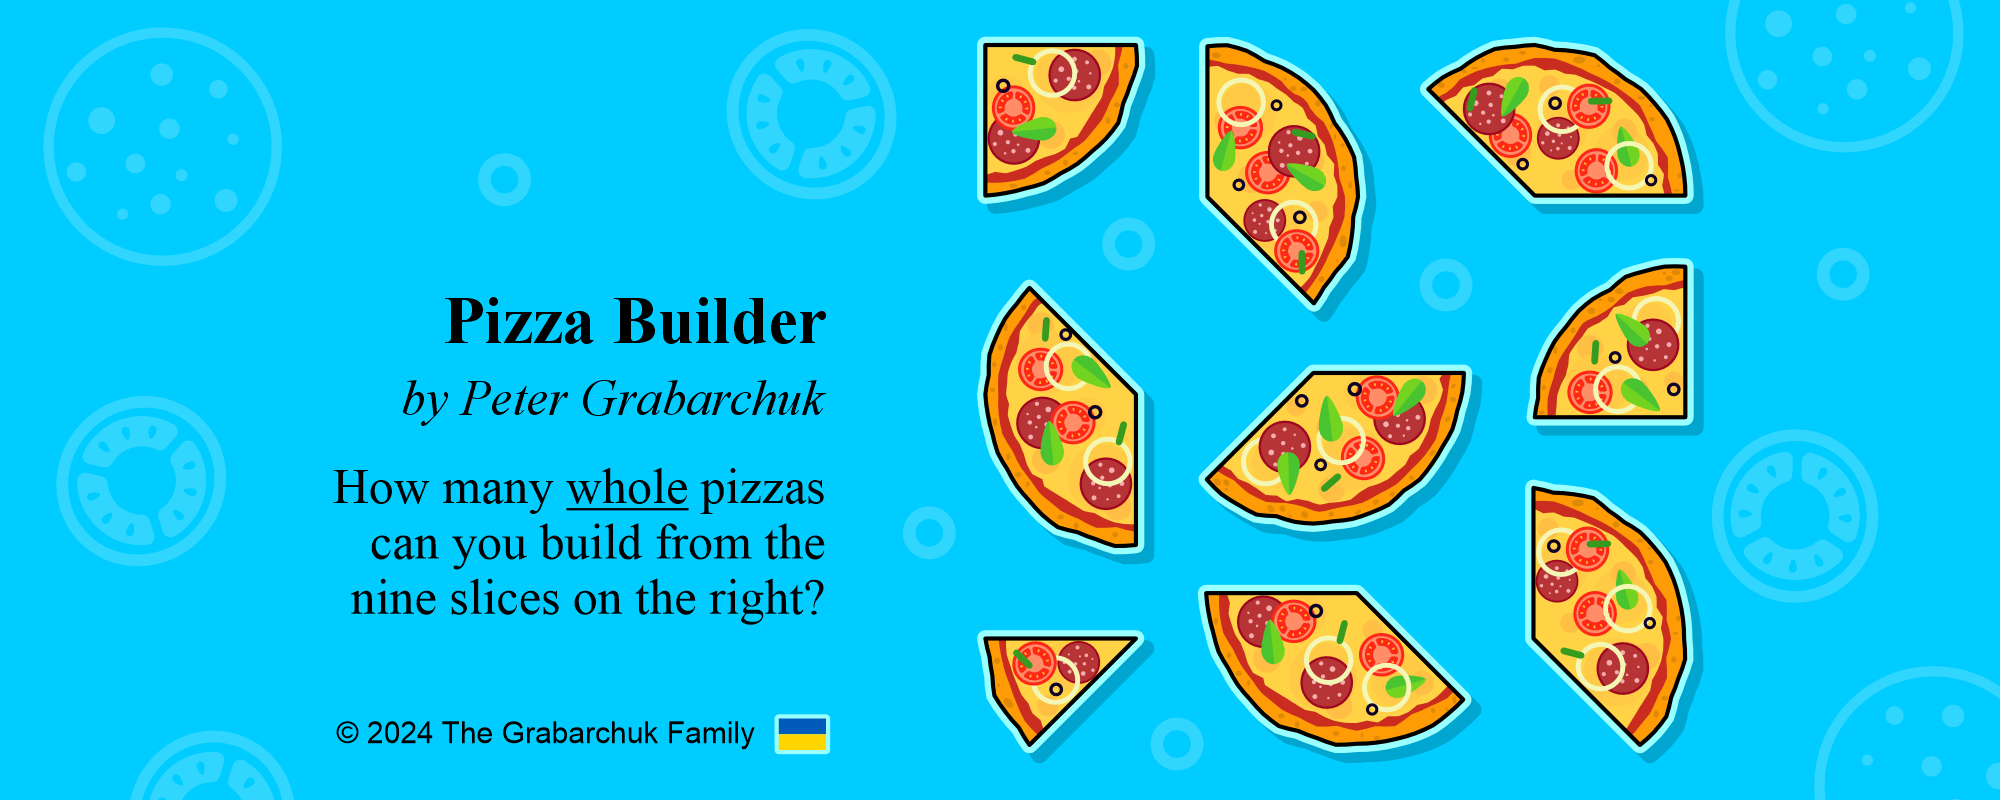 Pizza Builder by Peter Grabarchuk